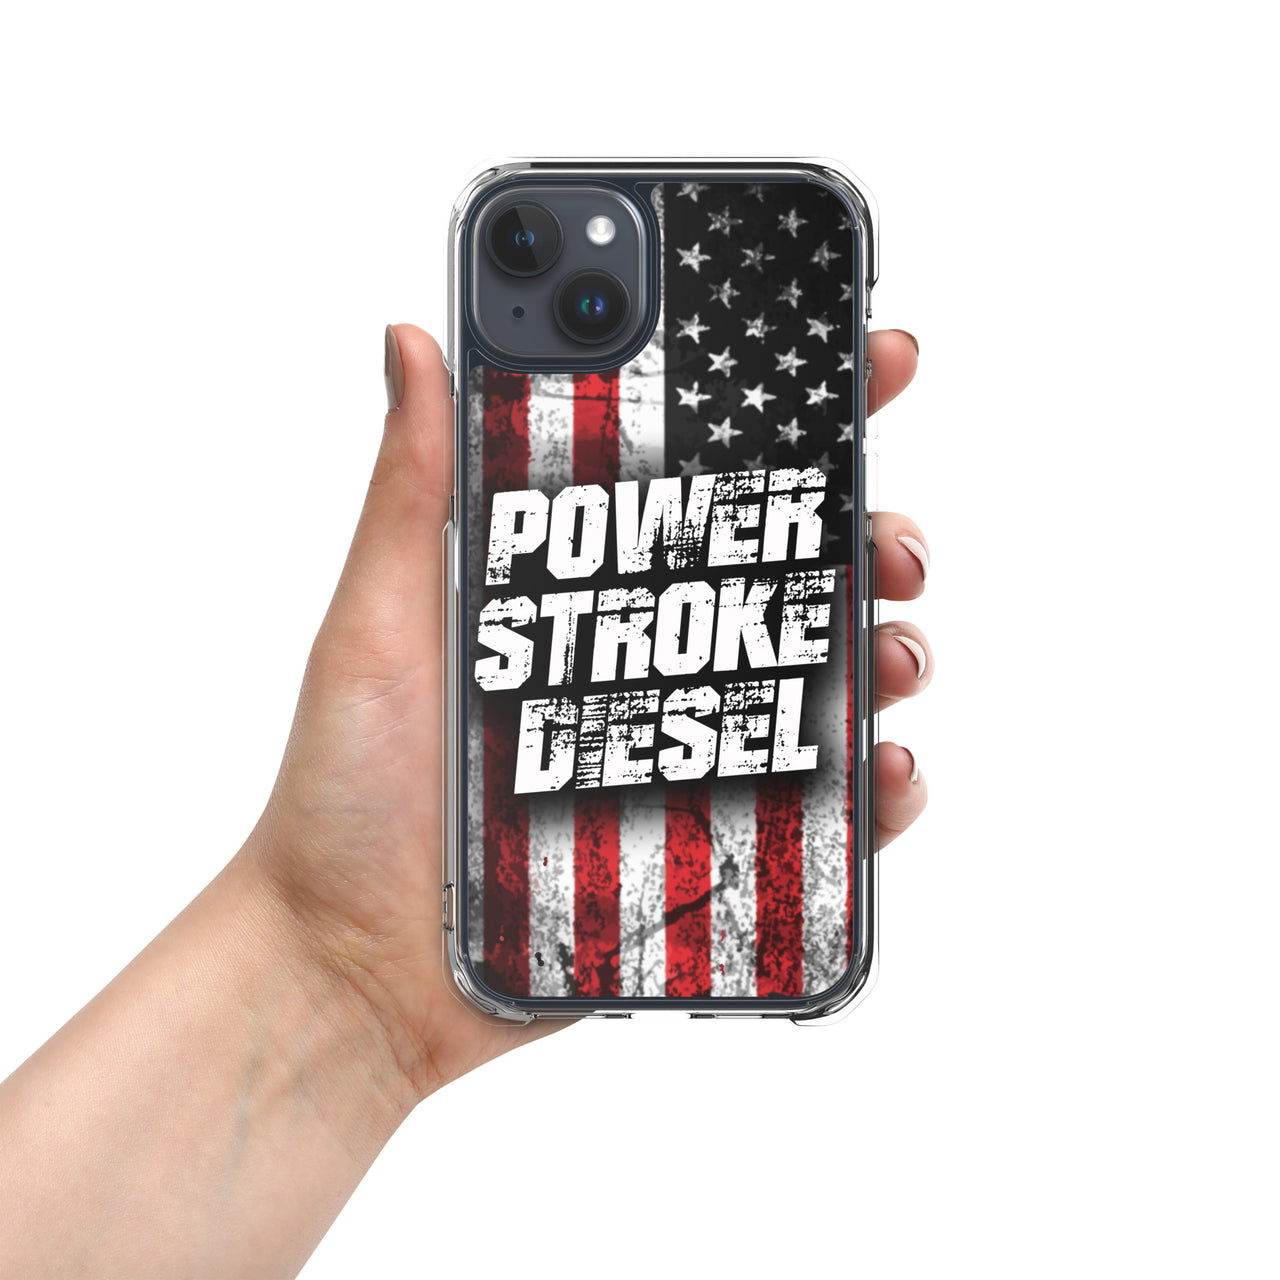 Power Stroke American Flag Phone Case - Fits iPhone